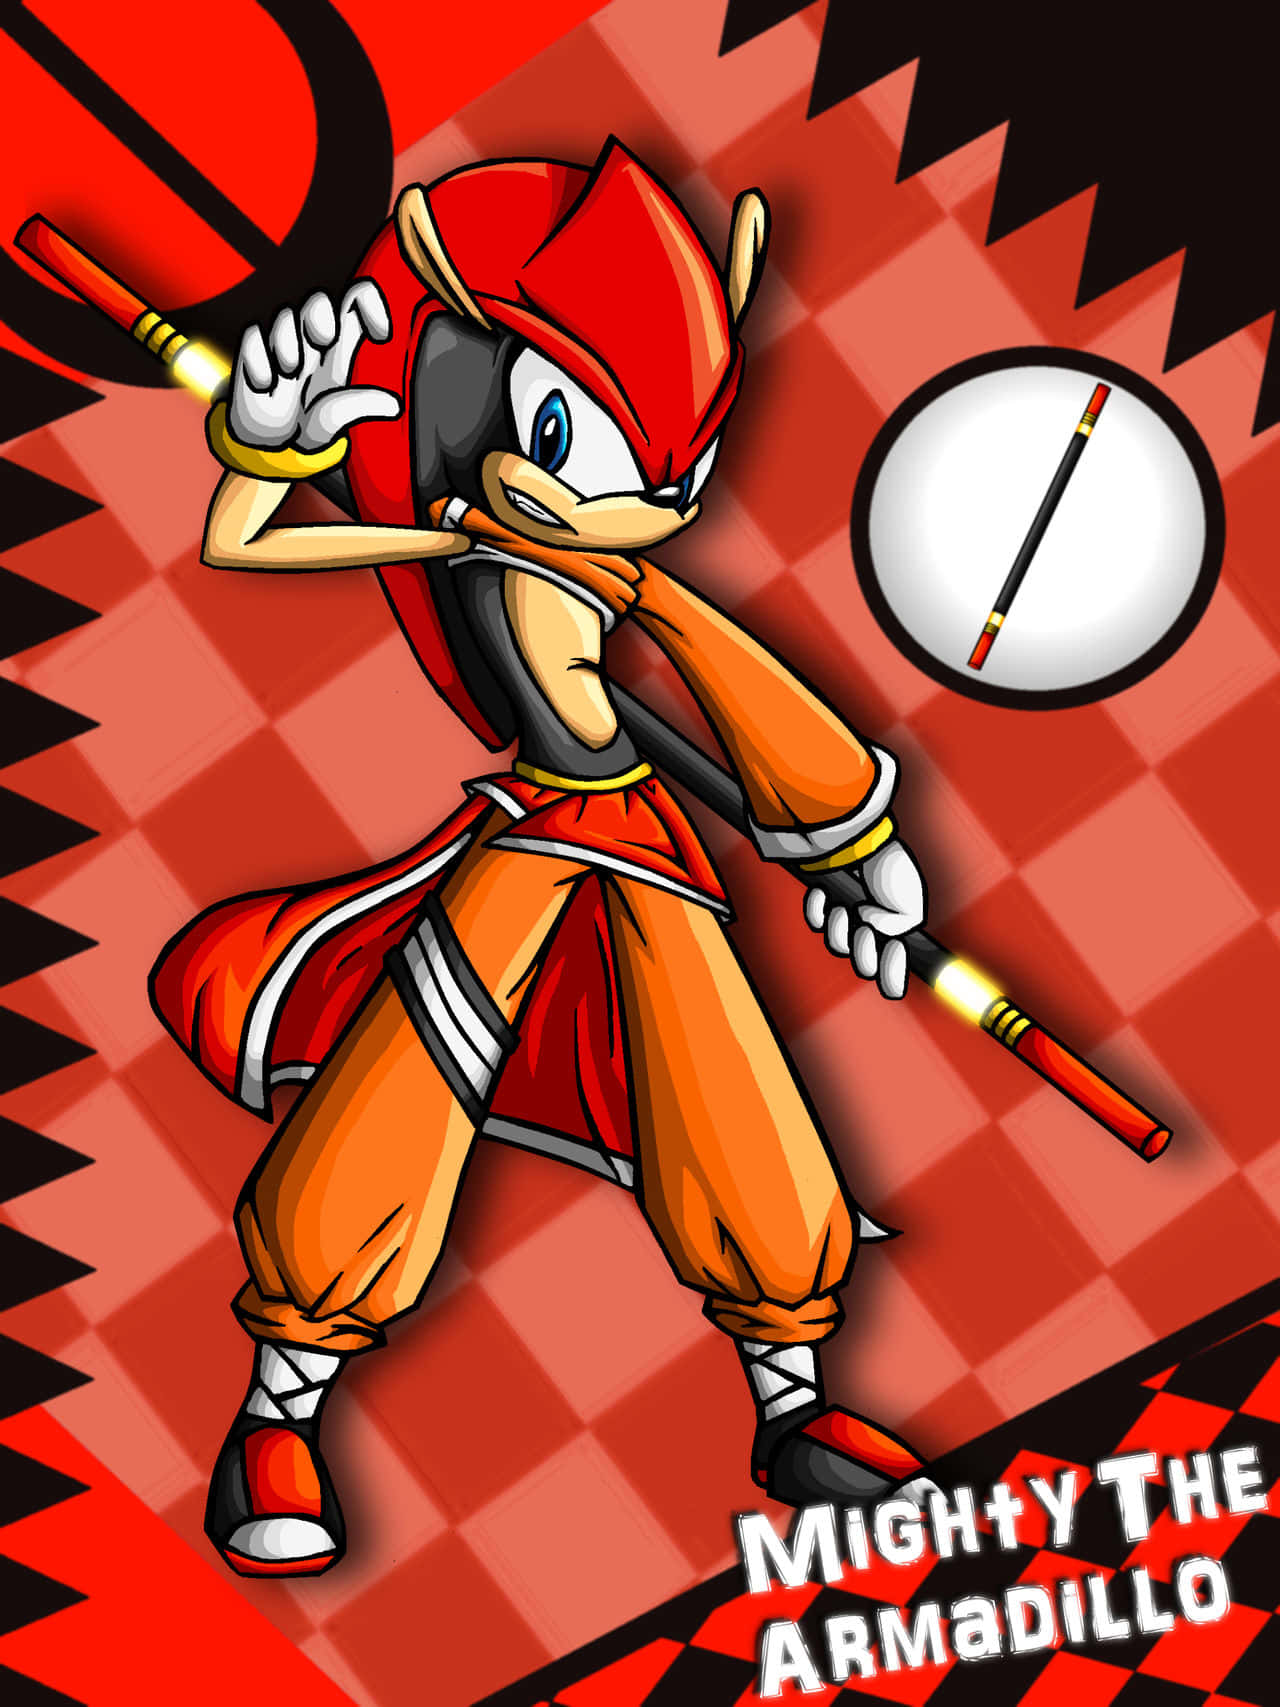 Download Mighty The Armadillo in Action Wallpaper